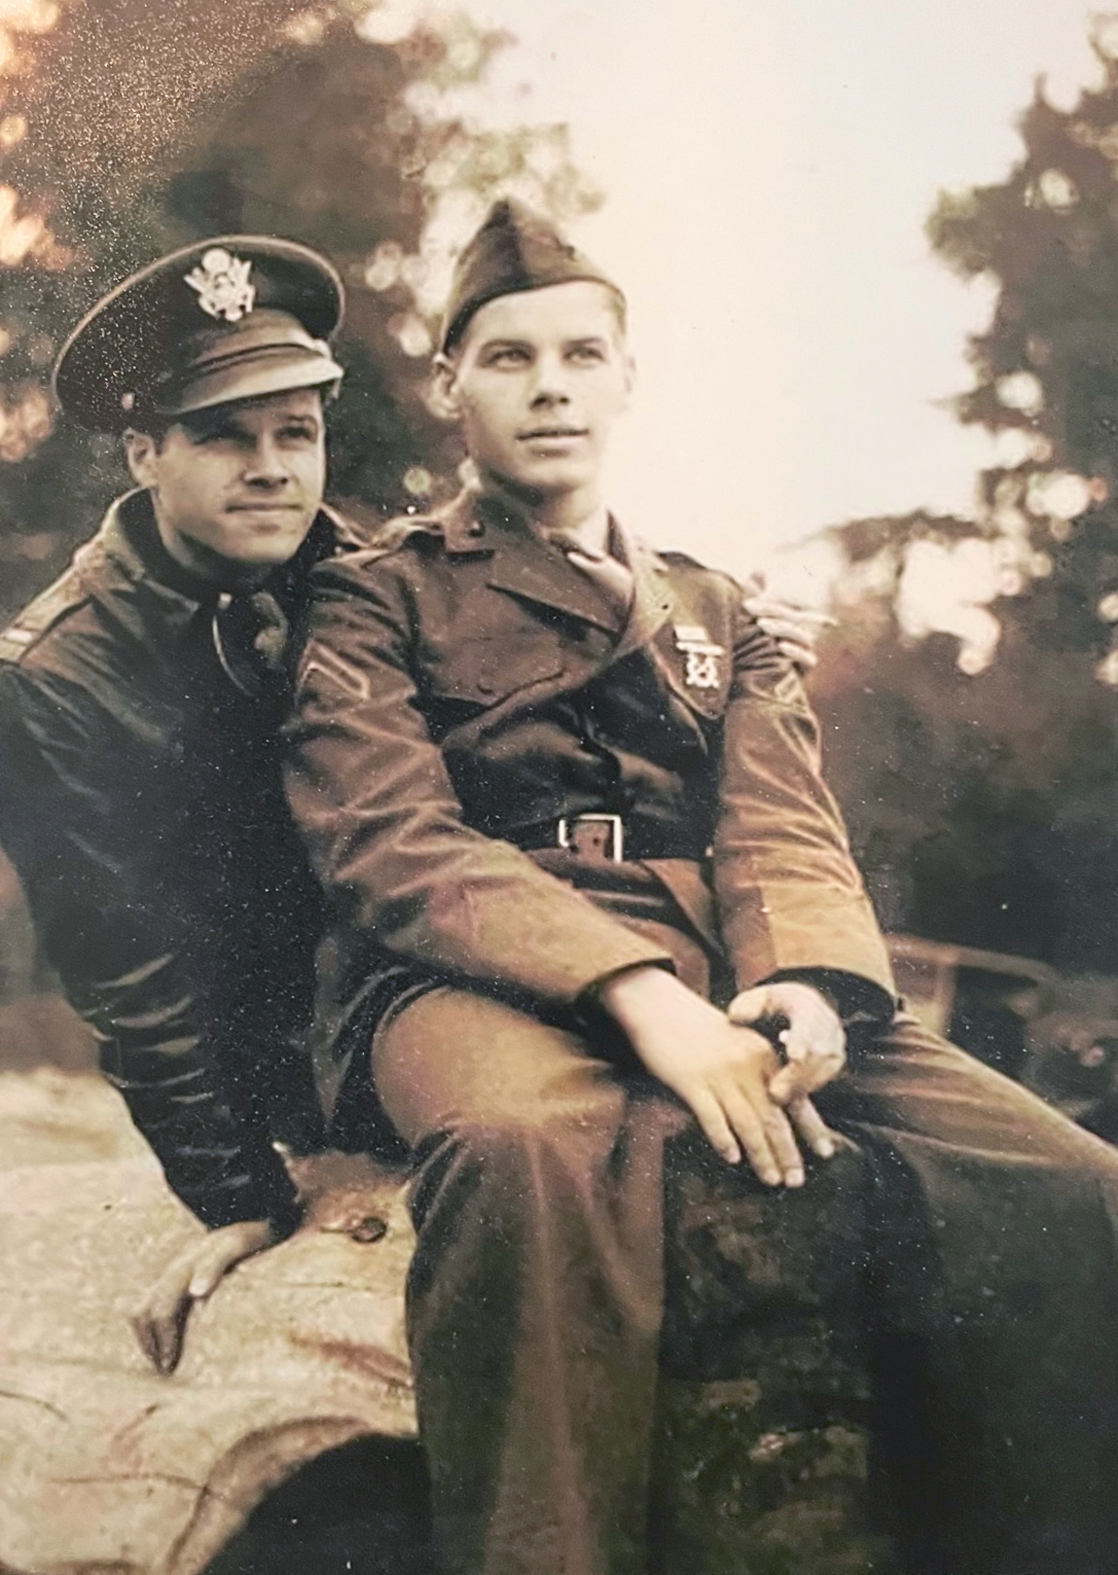 Twin brothers in military uniforms in the 1940s